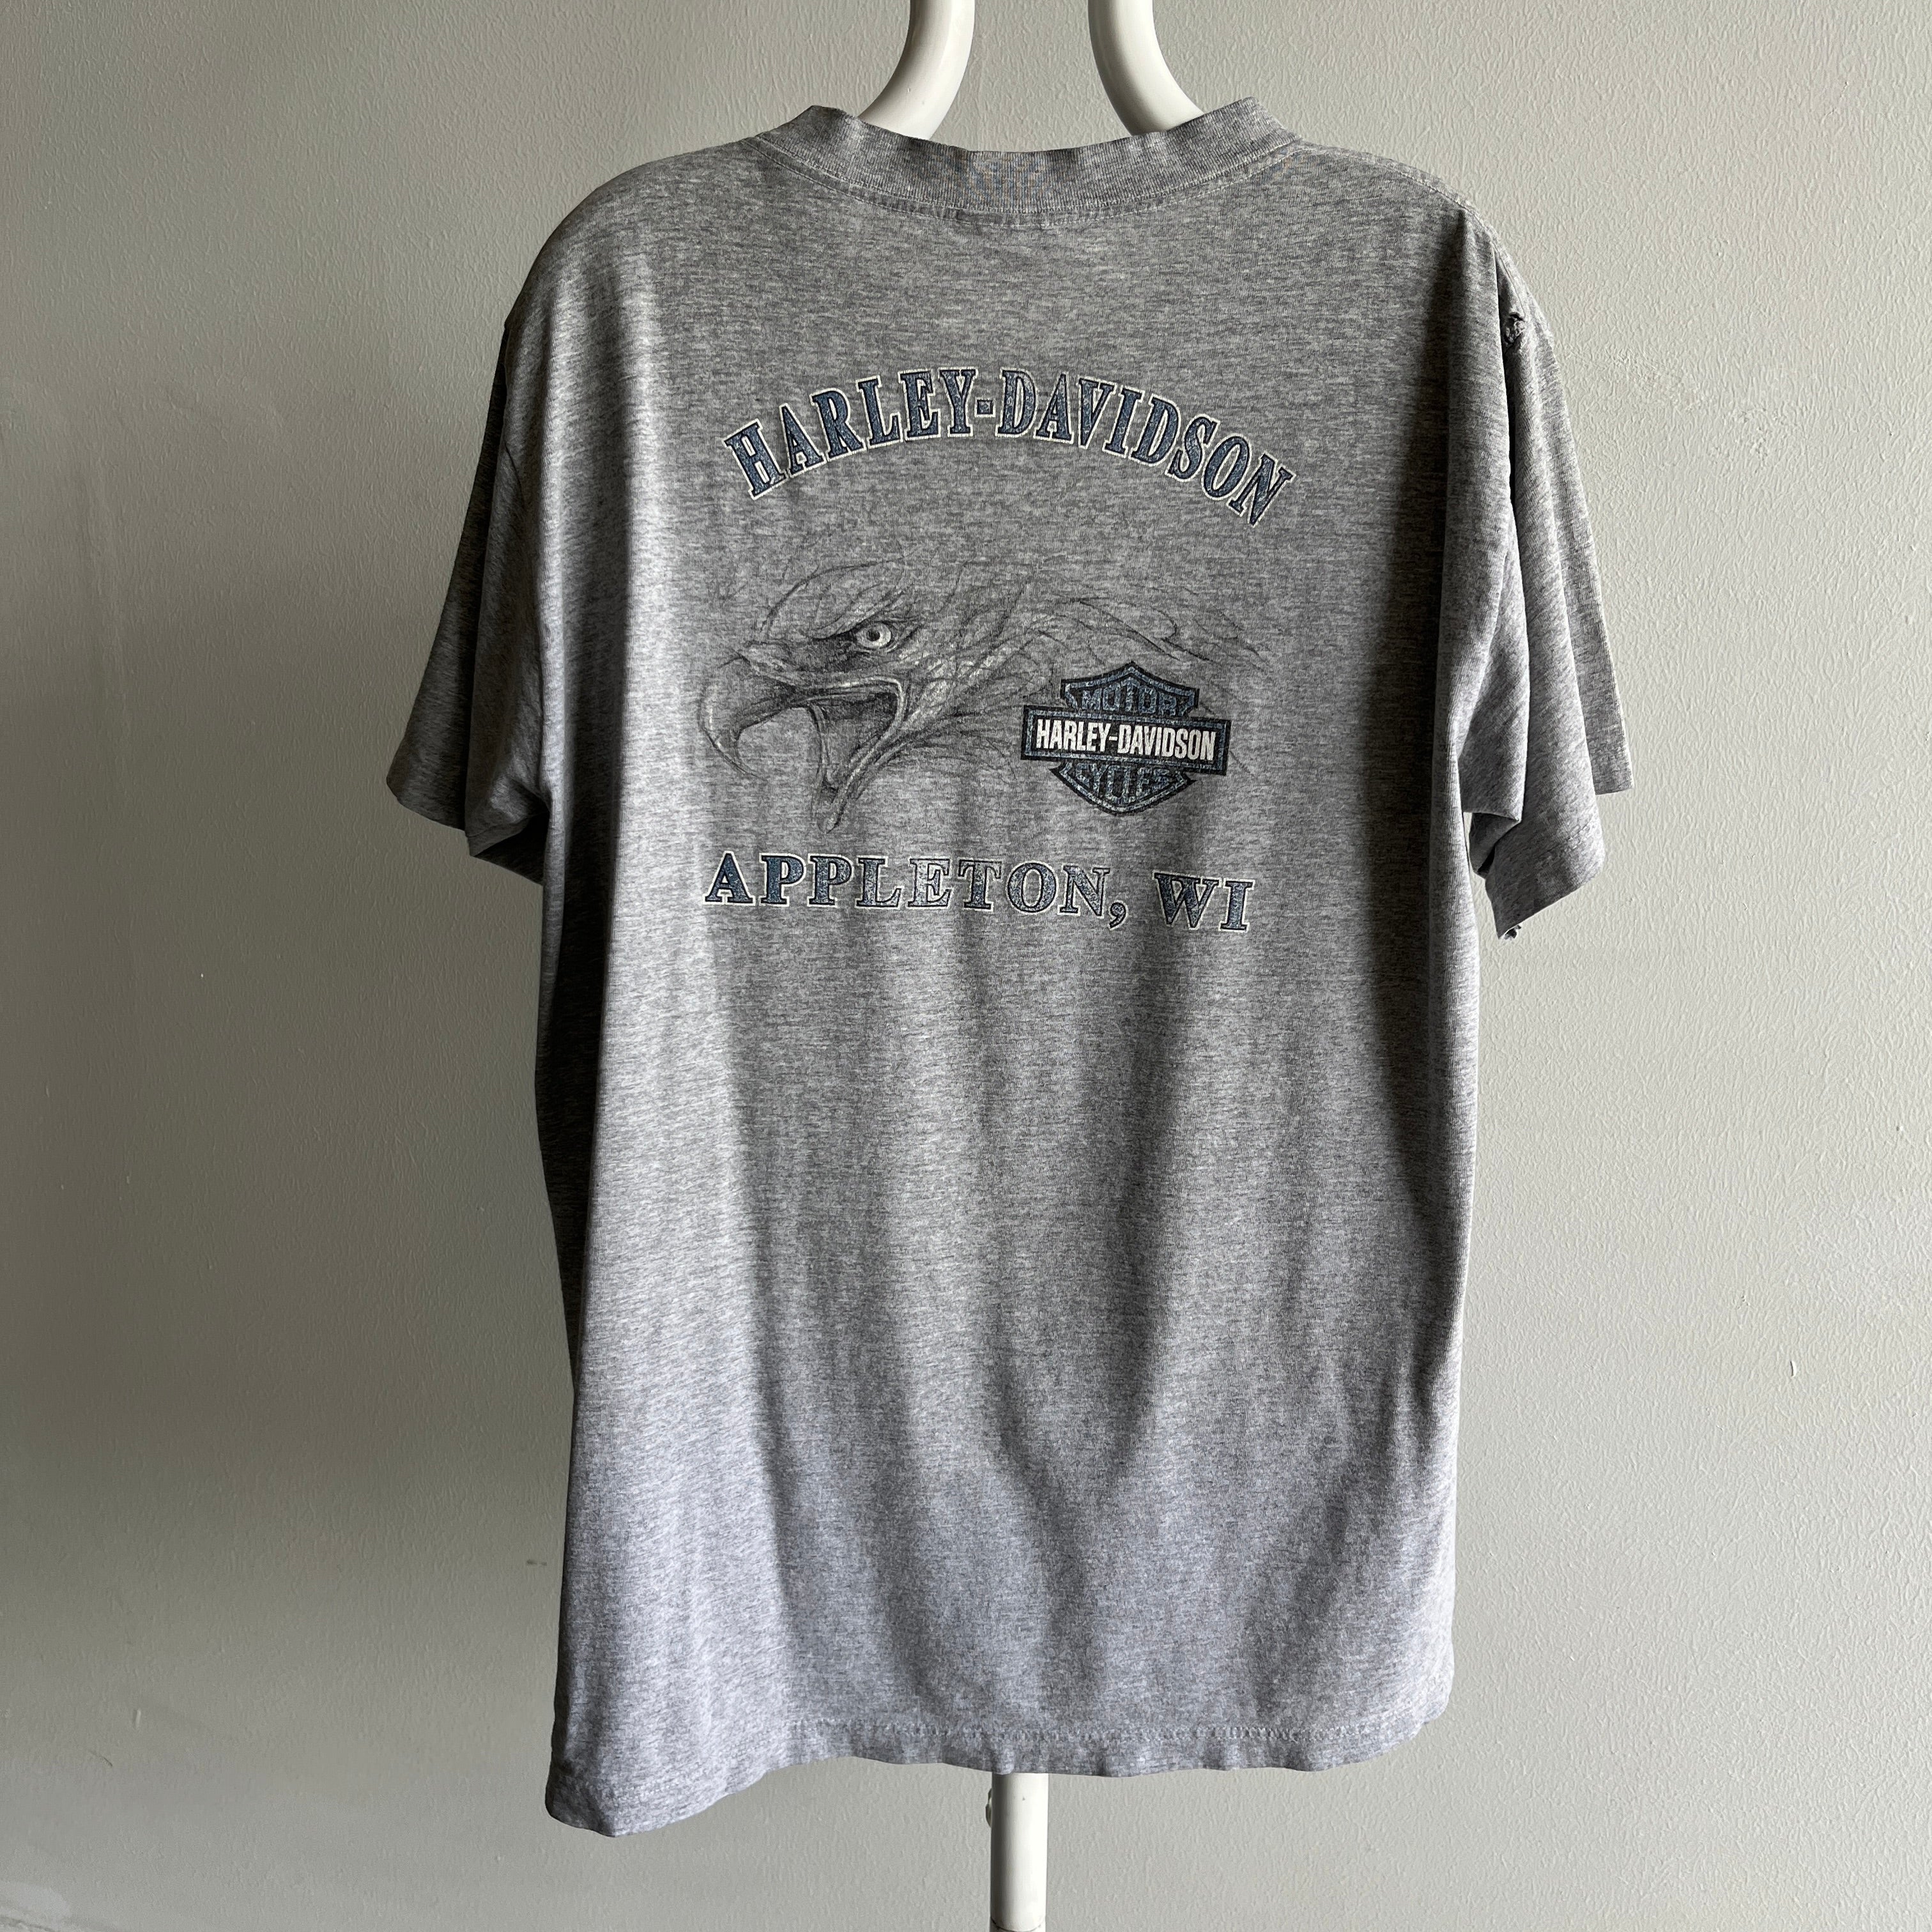 2005 Harley Davidson Front and Back T-Shirt - Soft and Worn